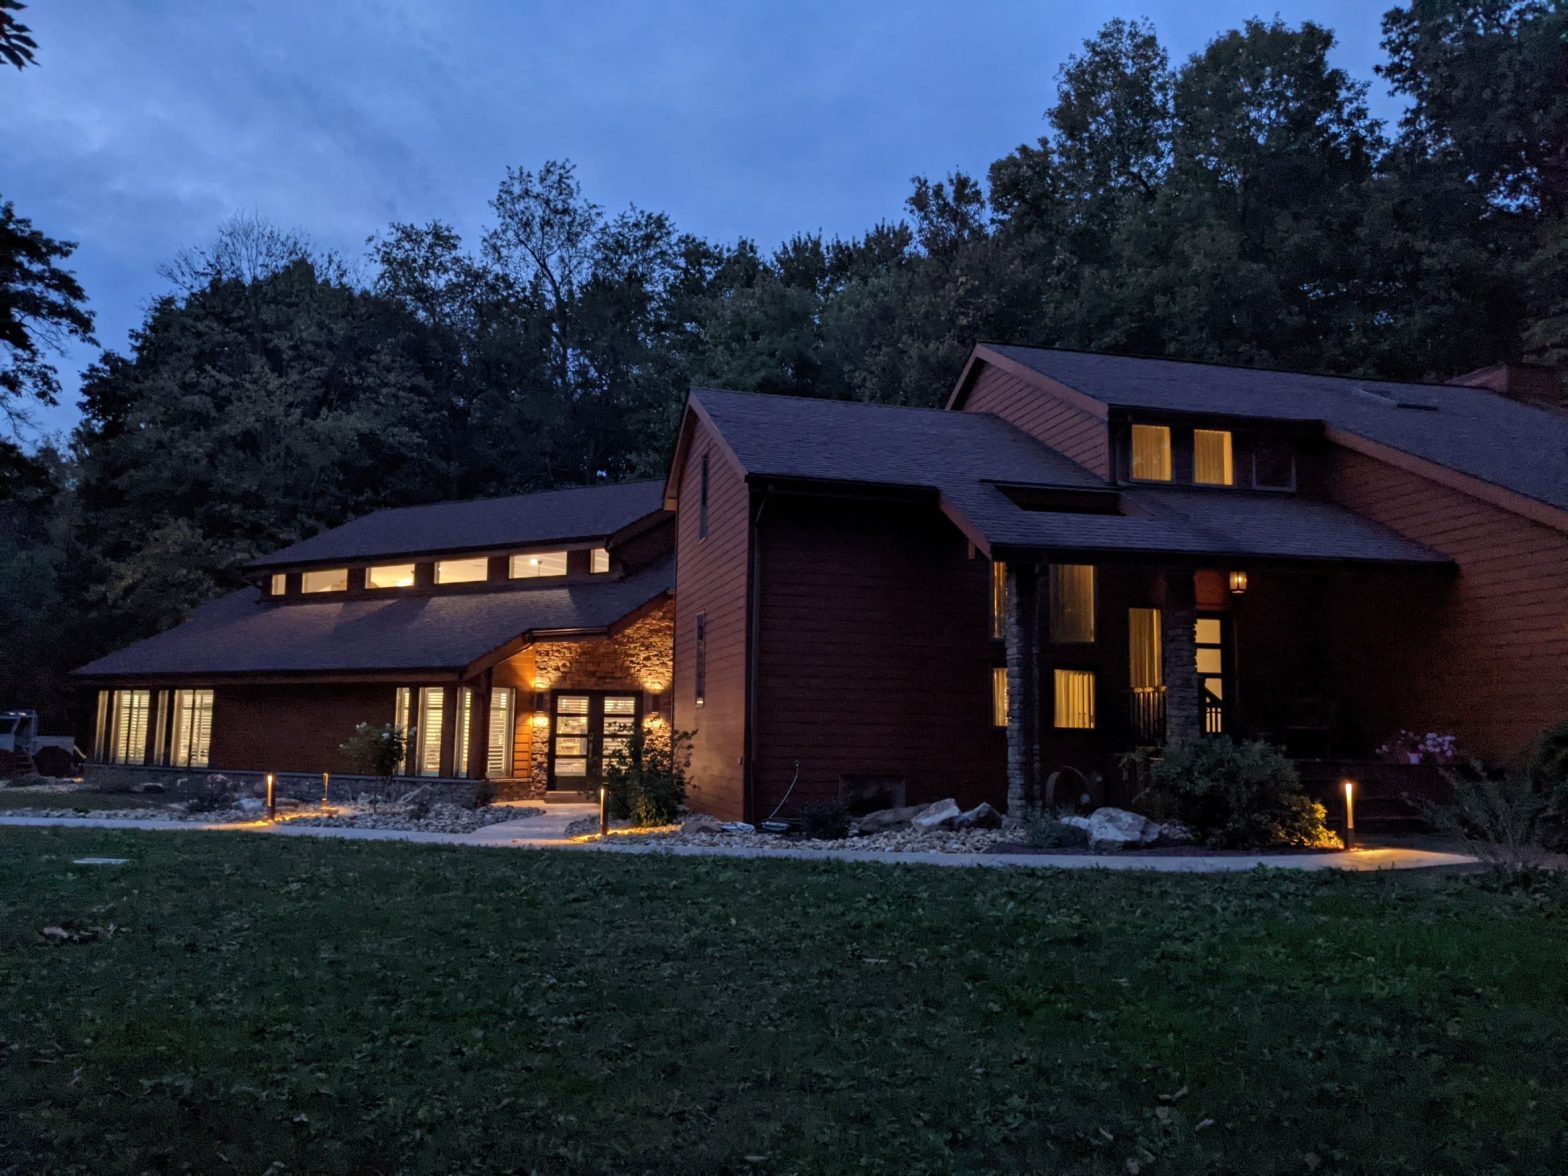 Exterior view of residential contemporary pool house addition to existing home at dusk